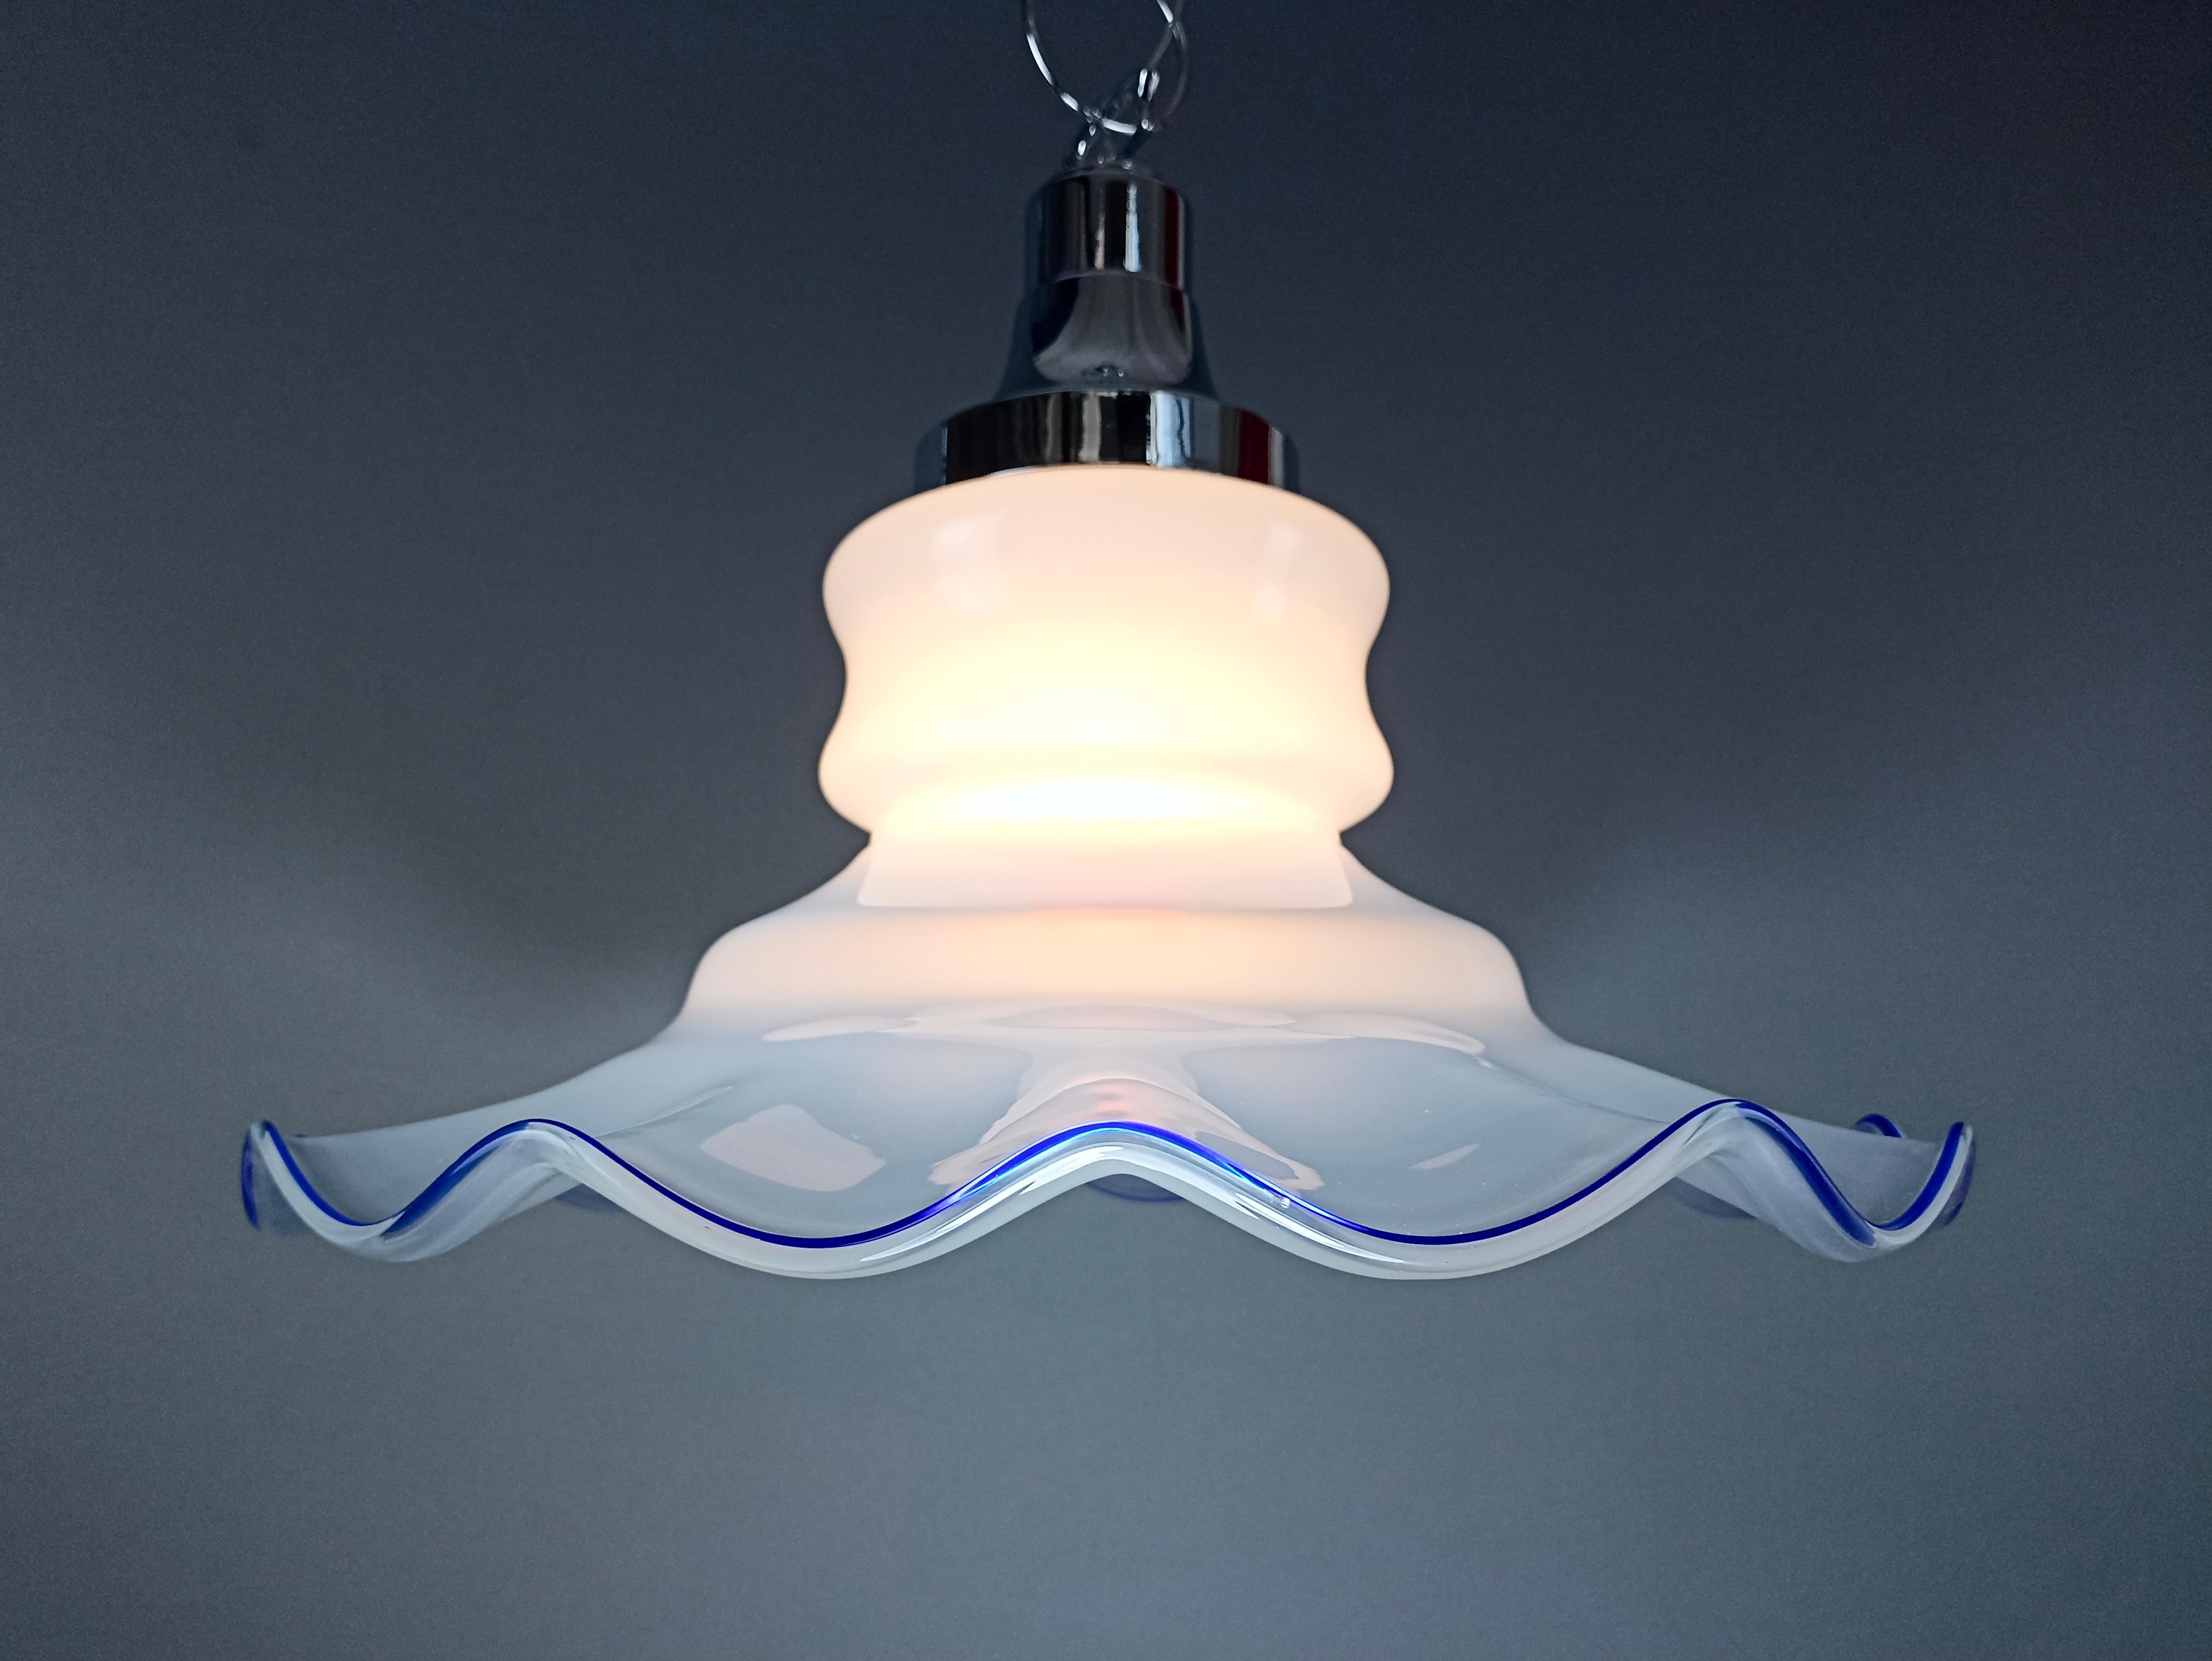 Murano glass Fazzoletto 1970s large one-light fascinating Italian pendant lamp. Chain and frame in chromed metal, lampshade in milky white Murano 'Lattimo' art glass, shaded towards the edge and with a fine blue glass finish.
The so-called